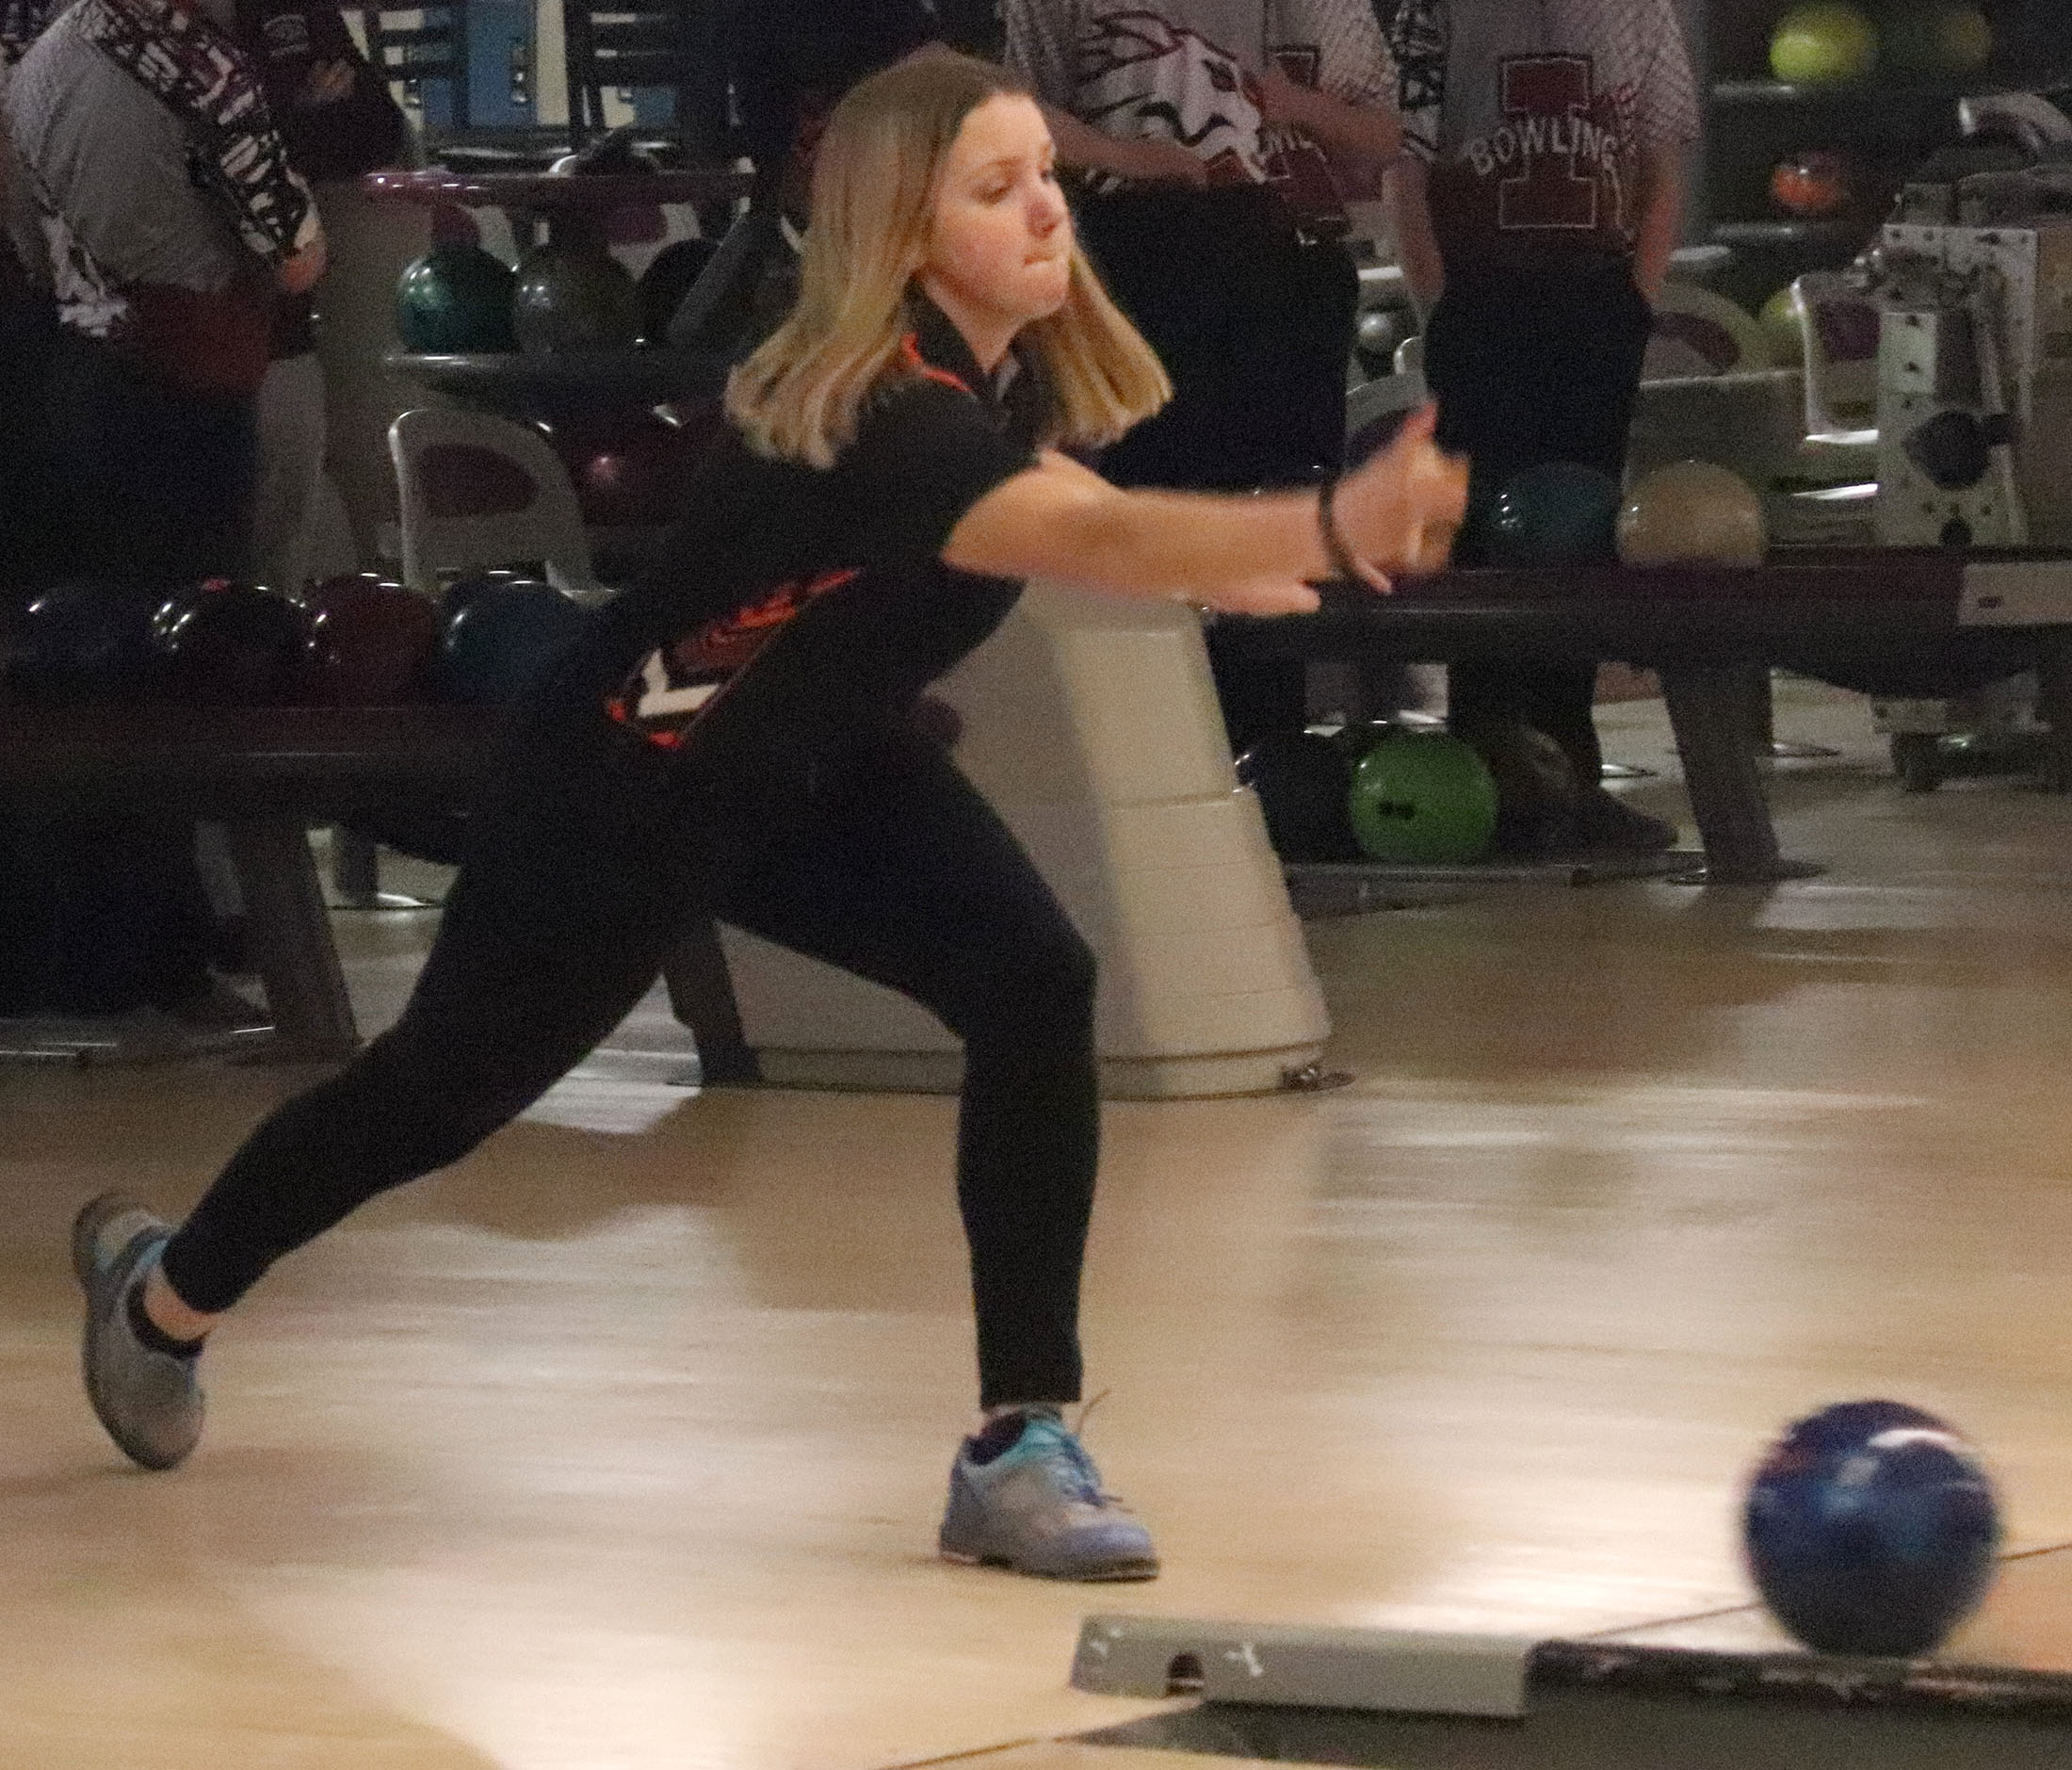 Comets top returning bowler switches to left hand